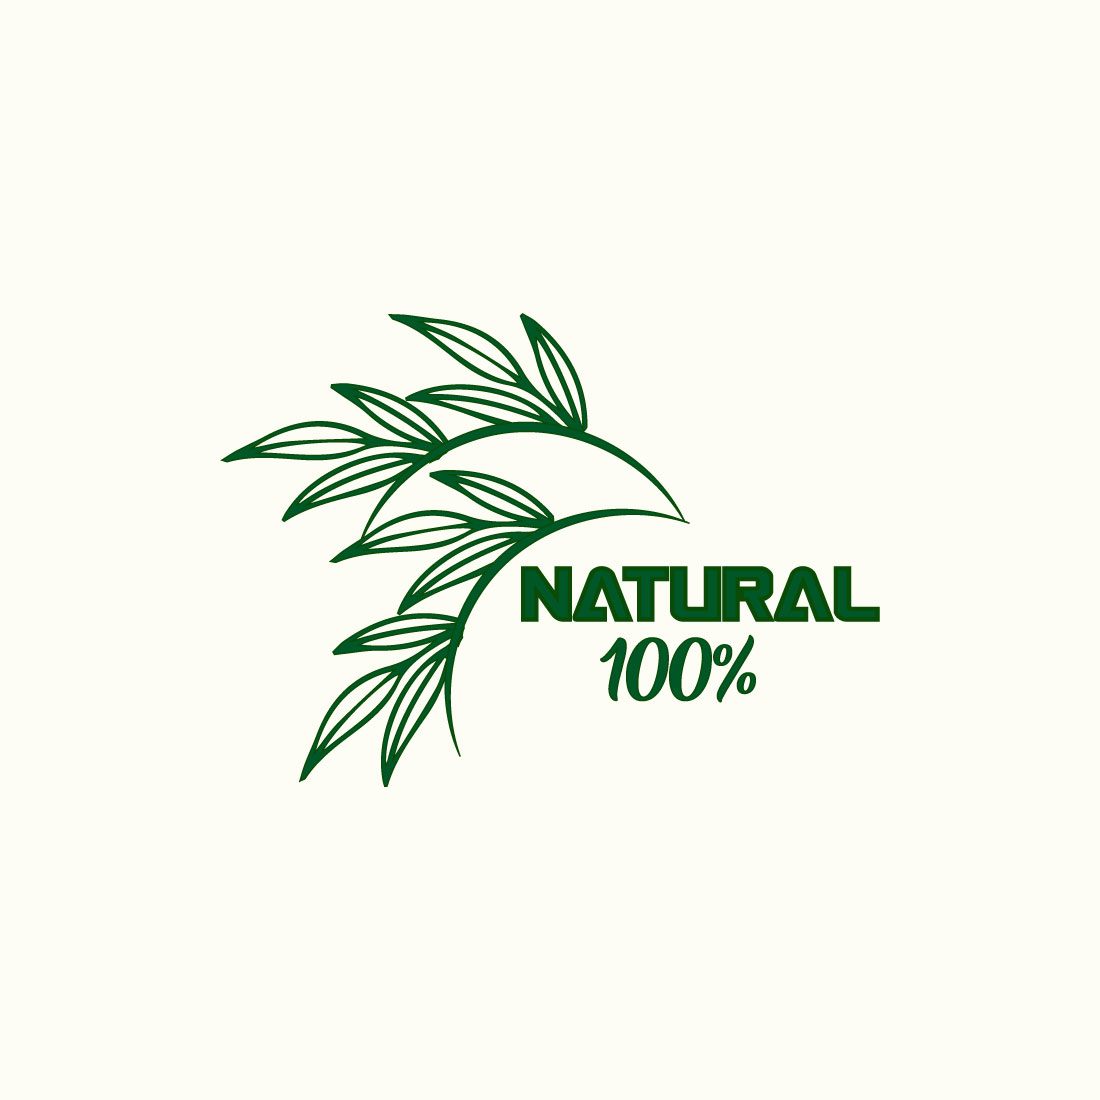 Free green food logo cover image.